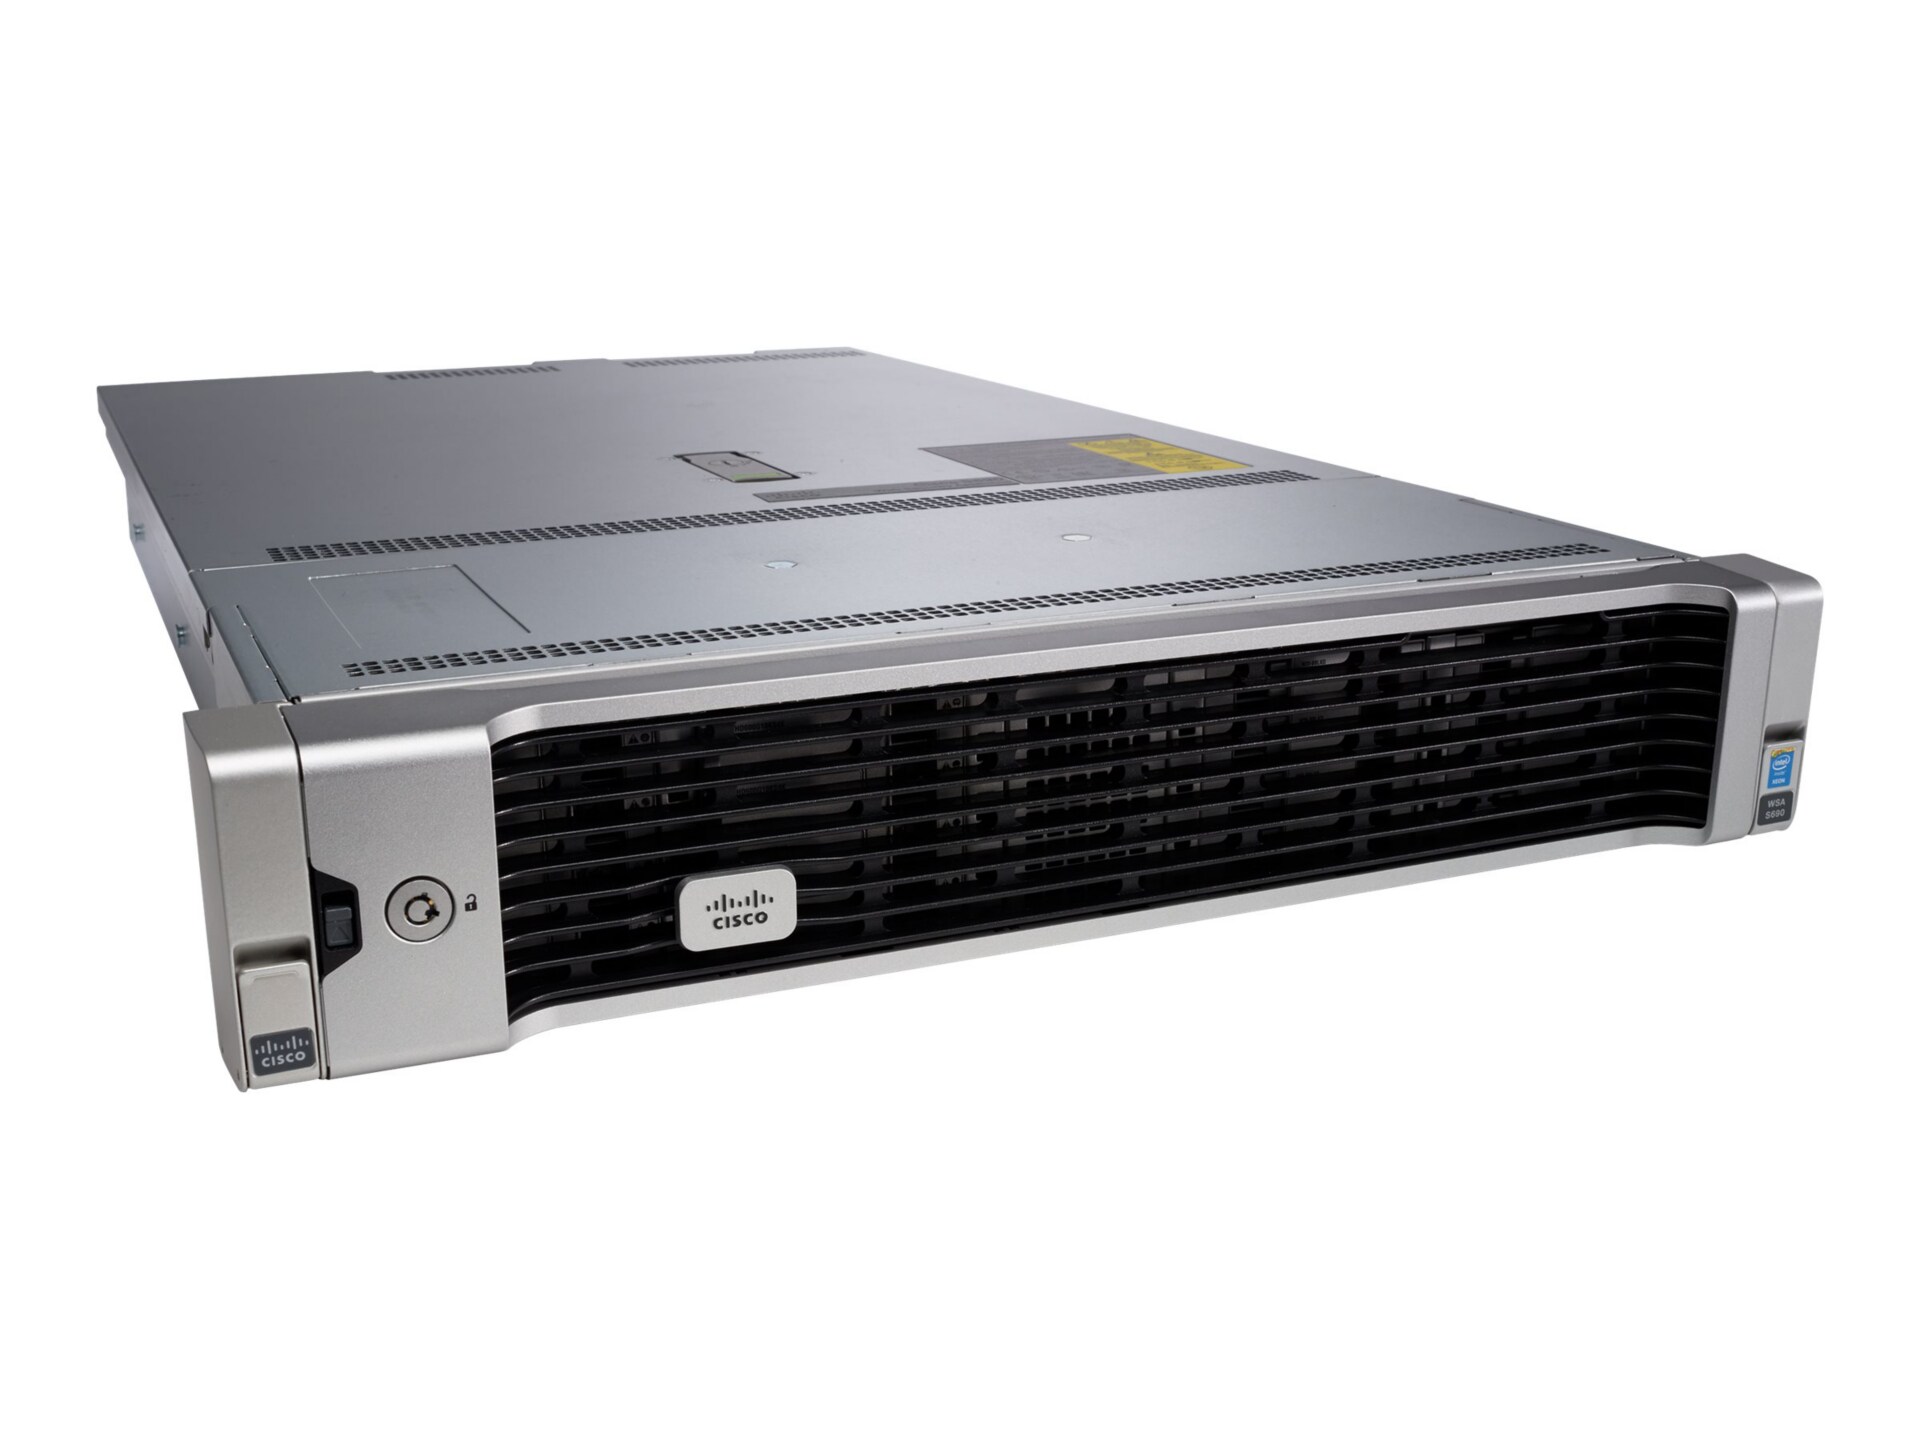 Cisco Web Security Appliance S690 - security appliance